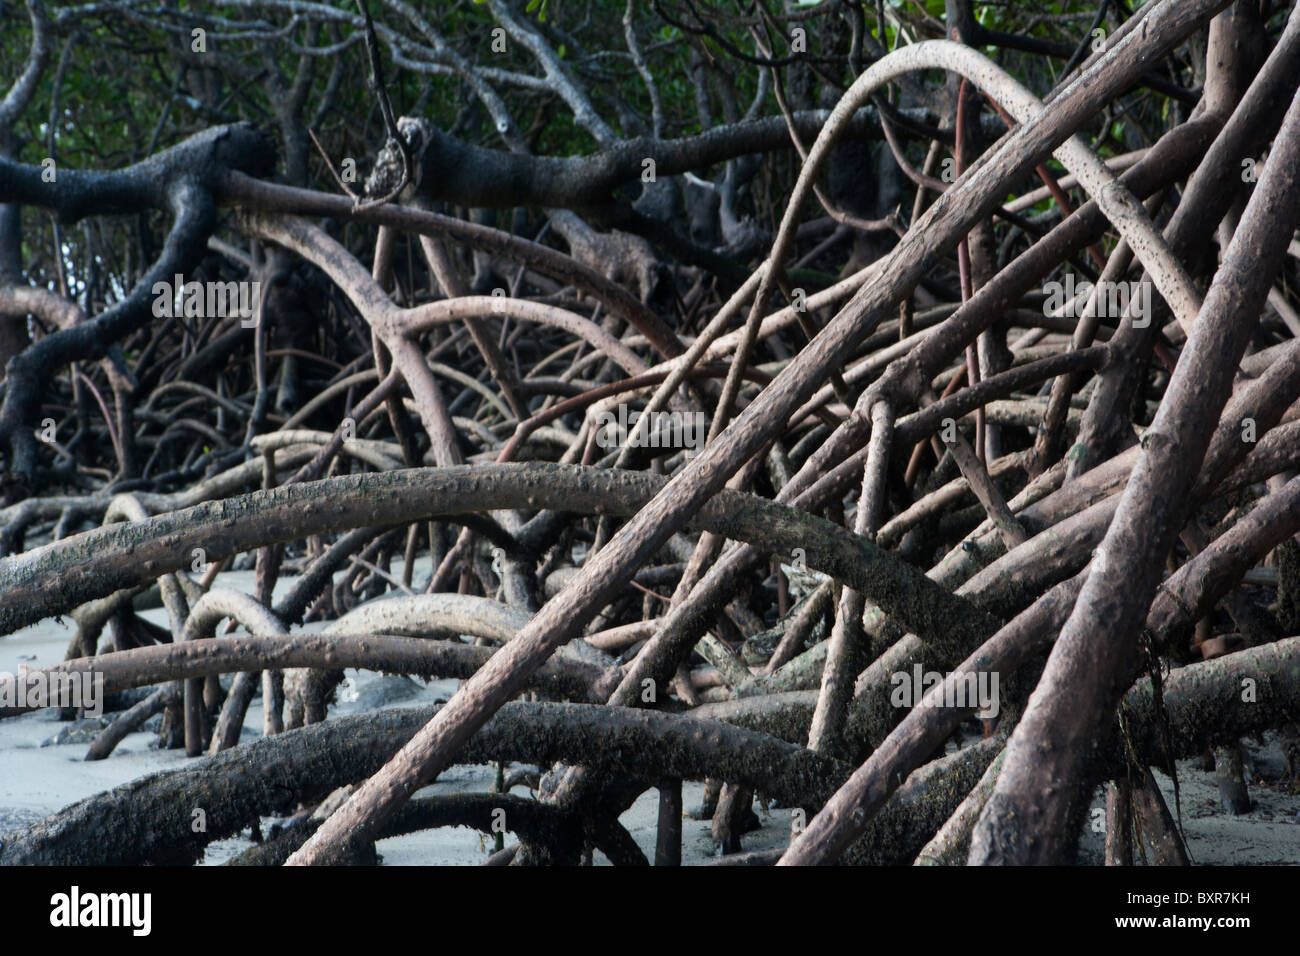 Detail of aerial root structure of mangrove forest trees. Stock Photo